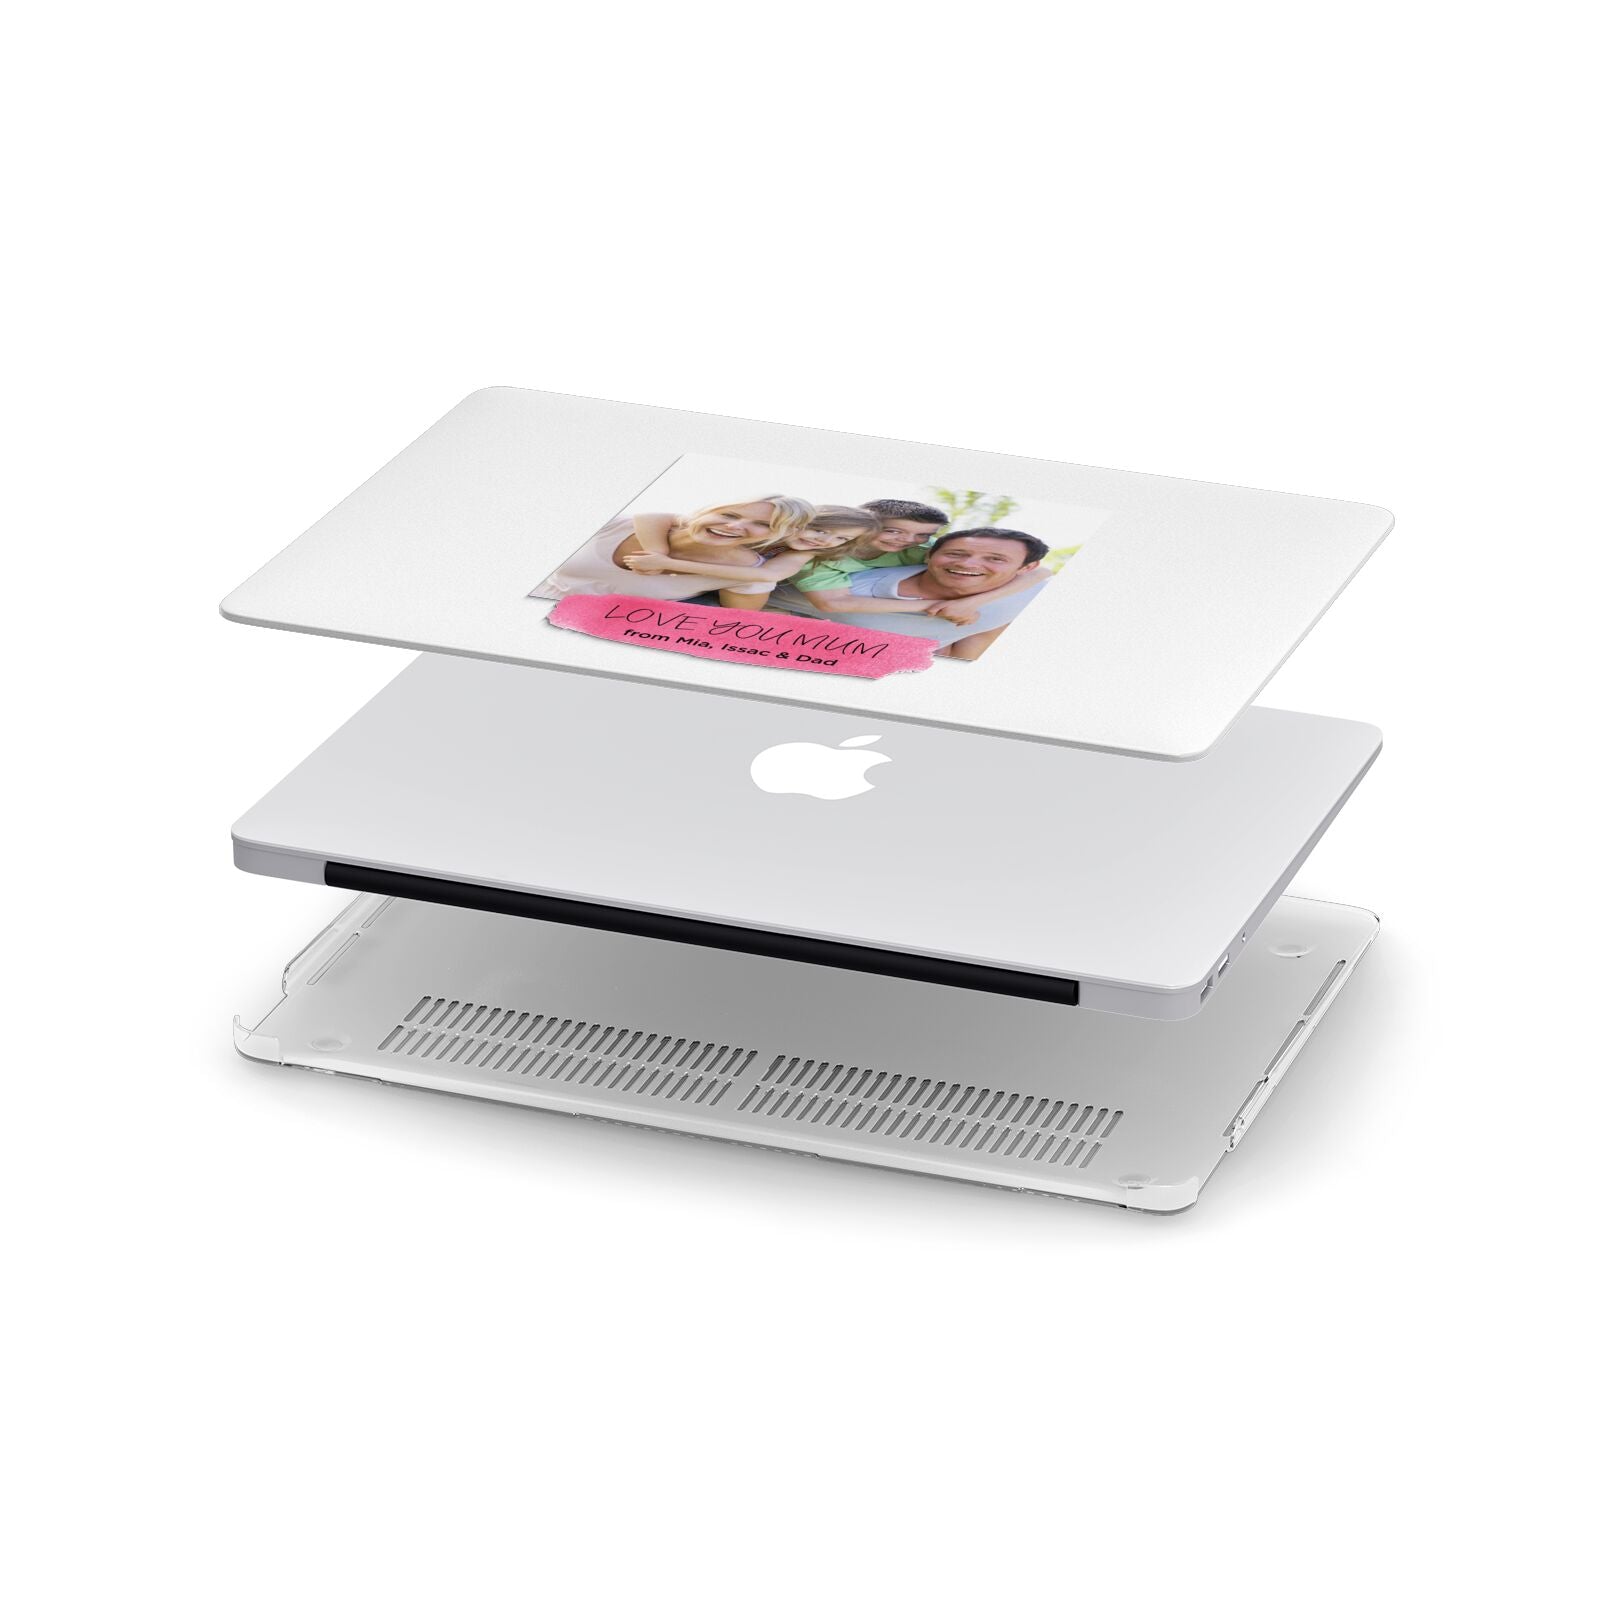 Personalised Photo Upload Mothers Day Apple MacBook Case in Detail